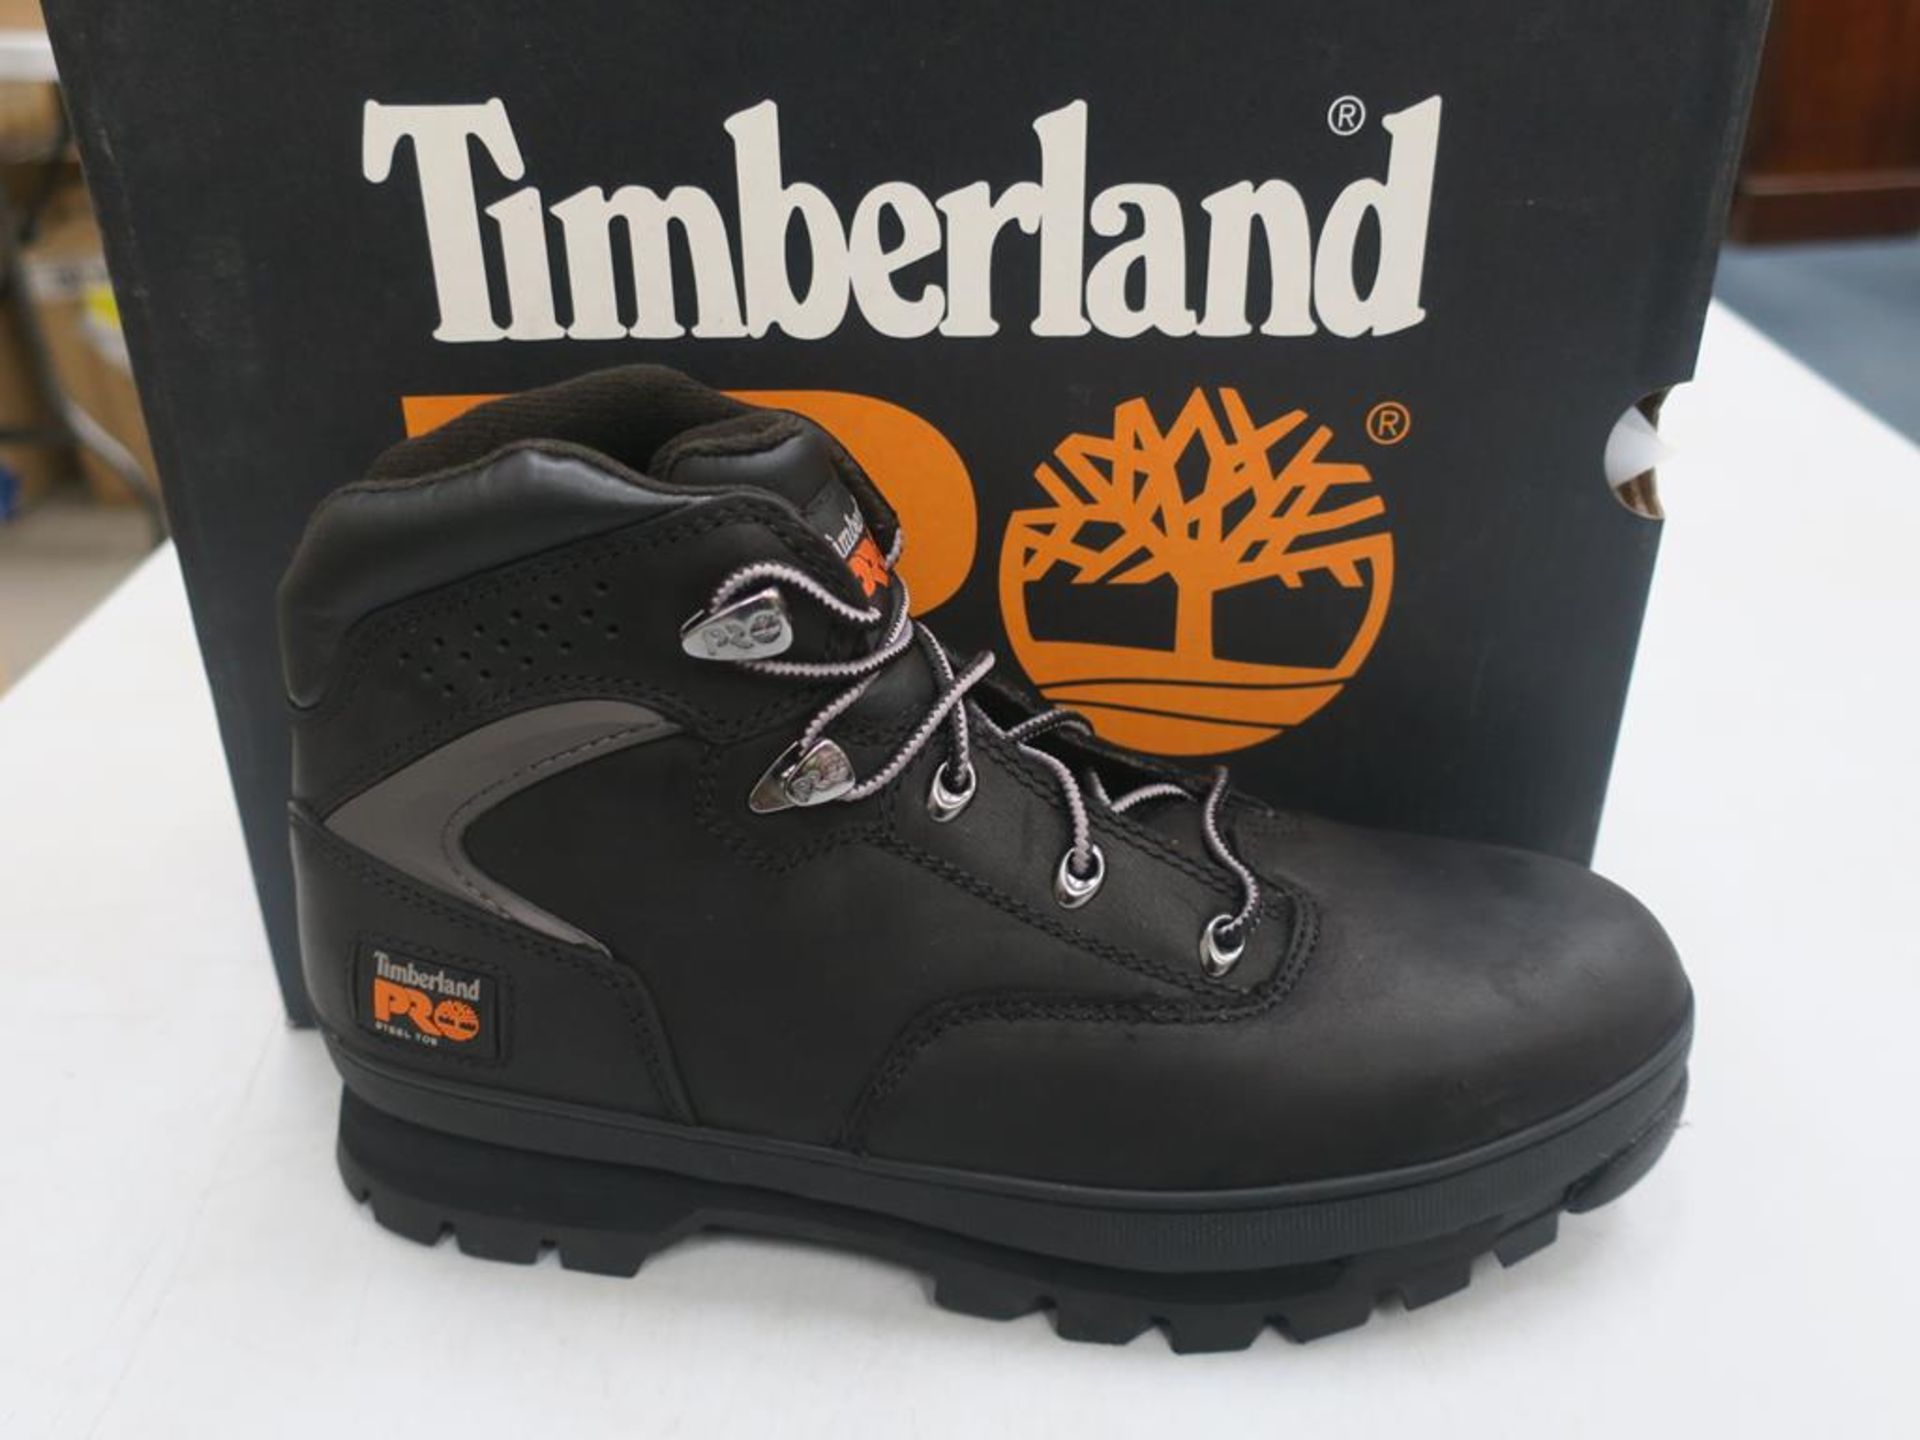 * A pair of New/Boxed Timberland Pro Boots, Euro Hiker 2G Steel Safety Toe in black 'improved fit'